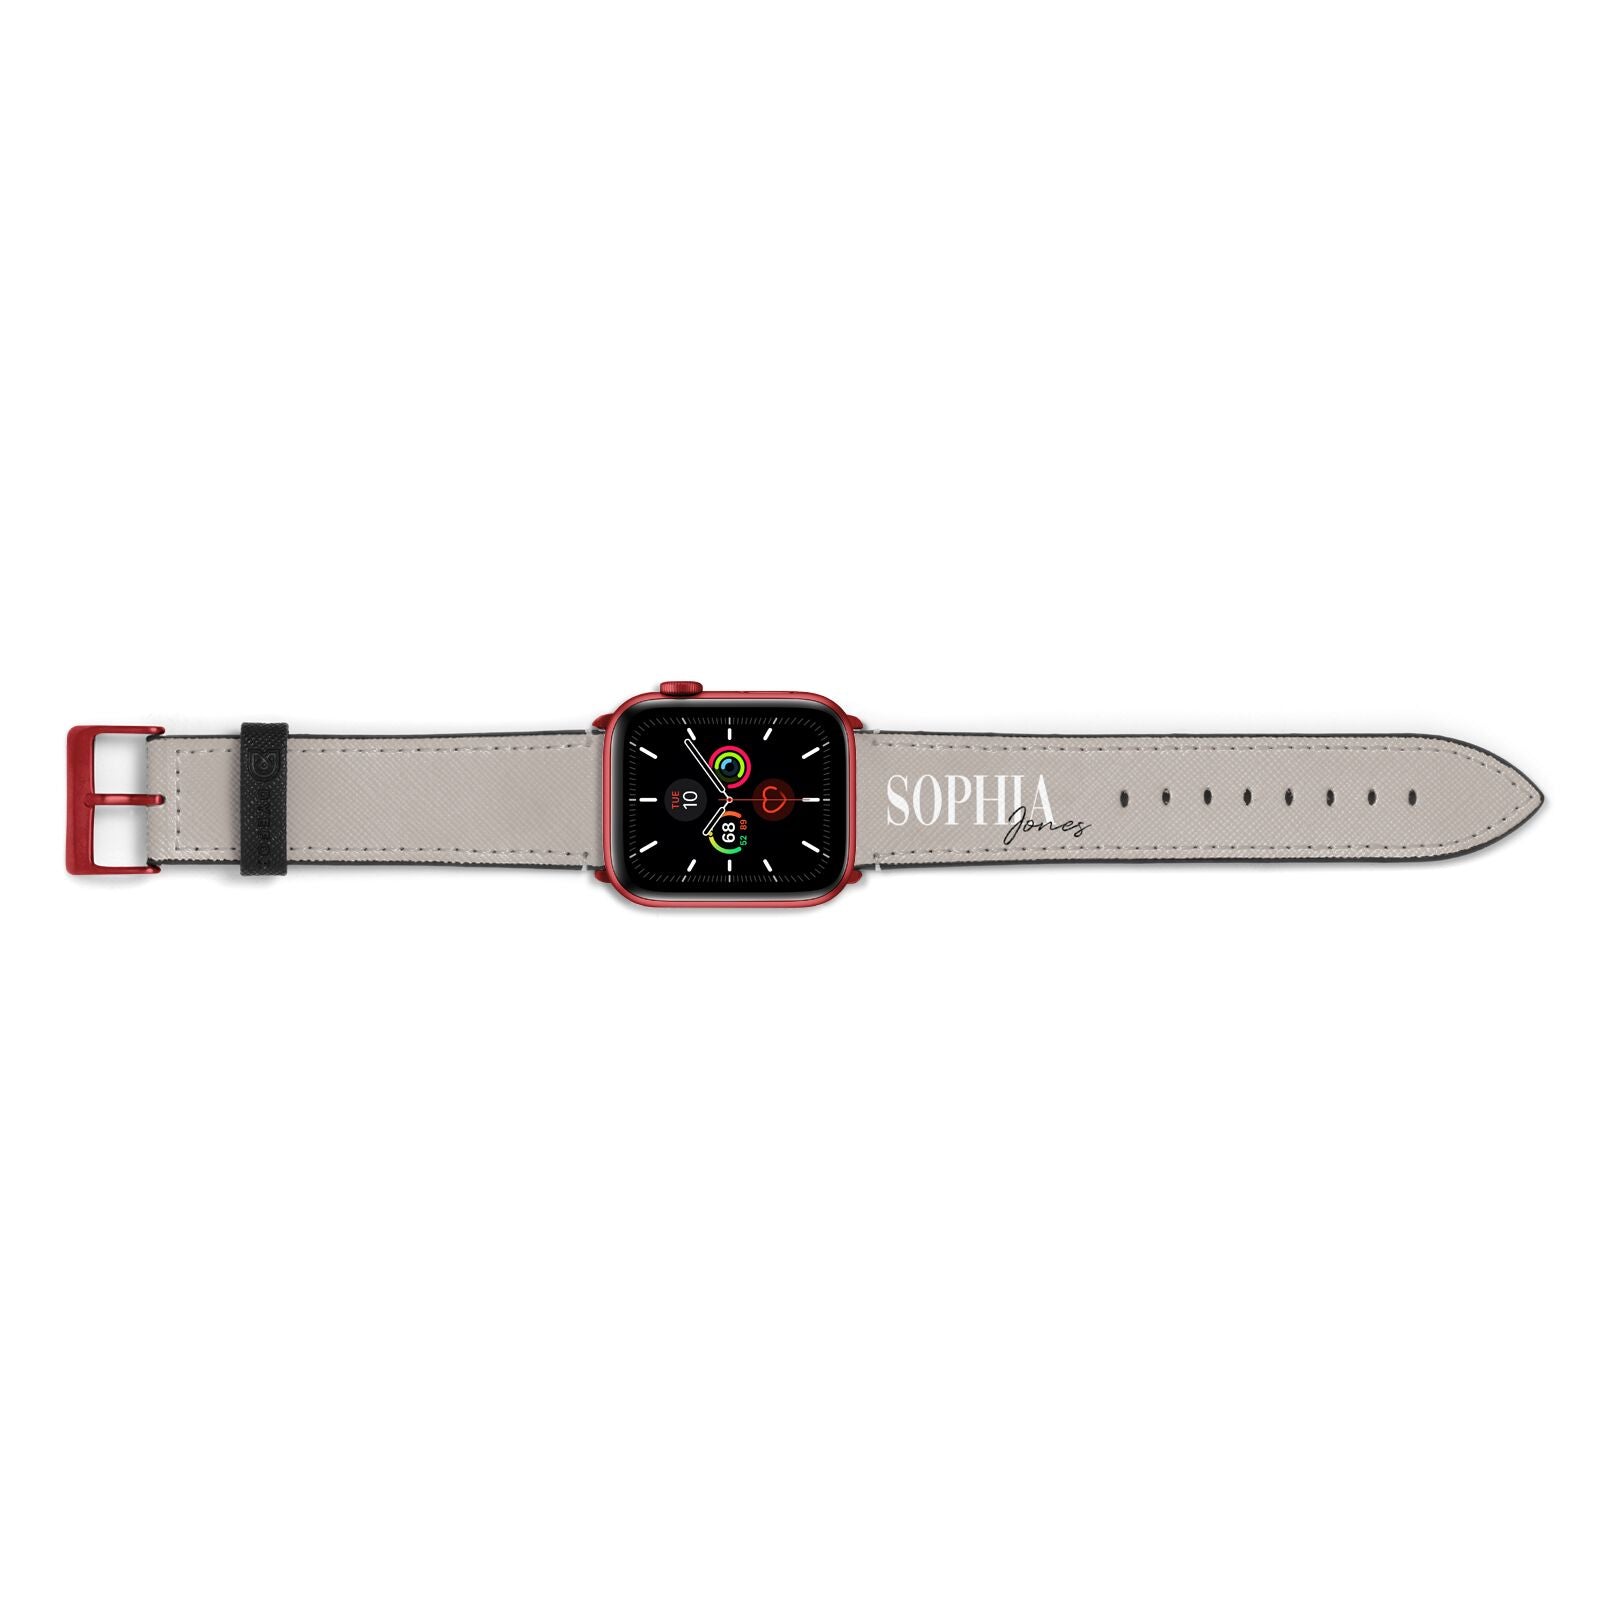 Stone Colour with Personalised Name Apple Watch Strap Landscape Image Red Hardware